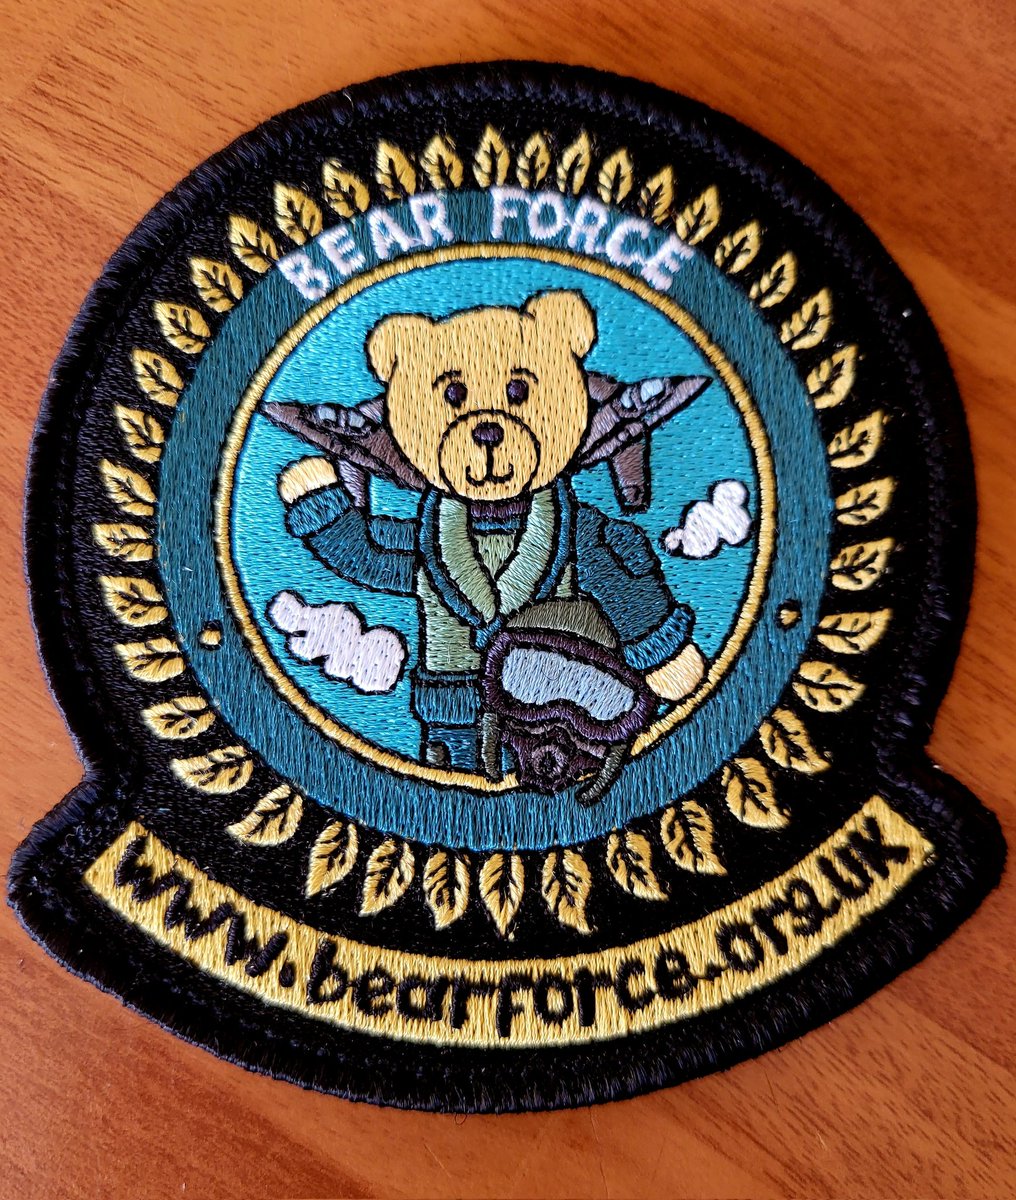 @MickSmeathUK I'll be watching from home in Denbigh and keenly following the Texans 🤠 from @RAF_Valley and obviously all others too 👋😍🏴󠁧󠁢󠁷󠁬󠁳󠁿 Our #bearforce AB Bear is onboard the Lead C130 courtesy of @Richard48535122